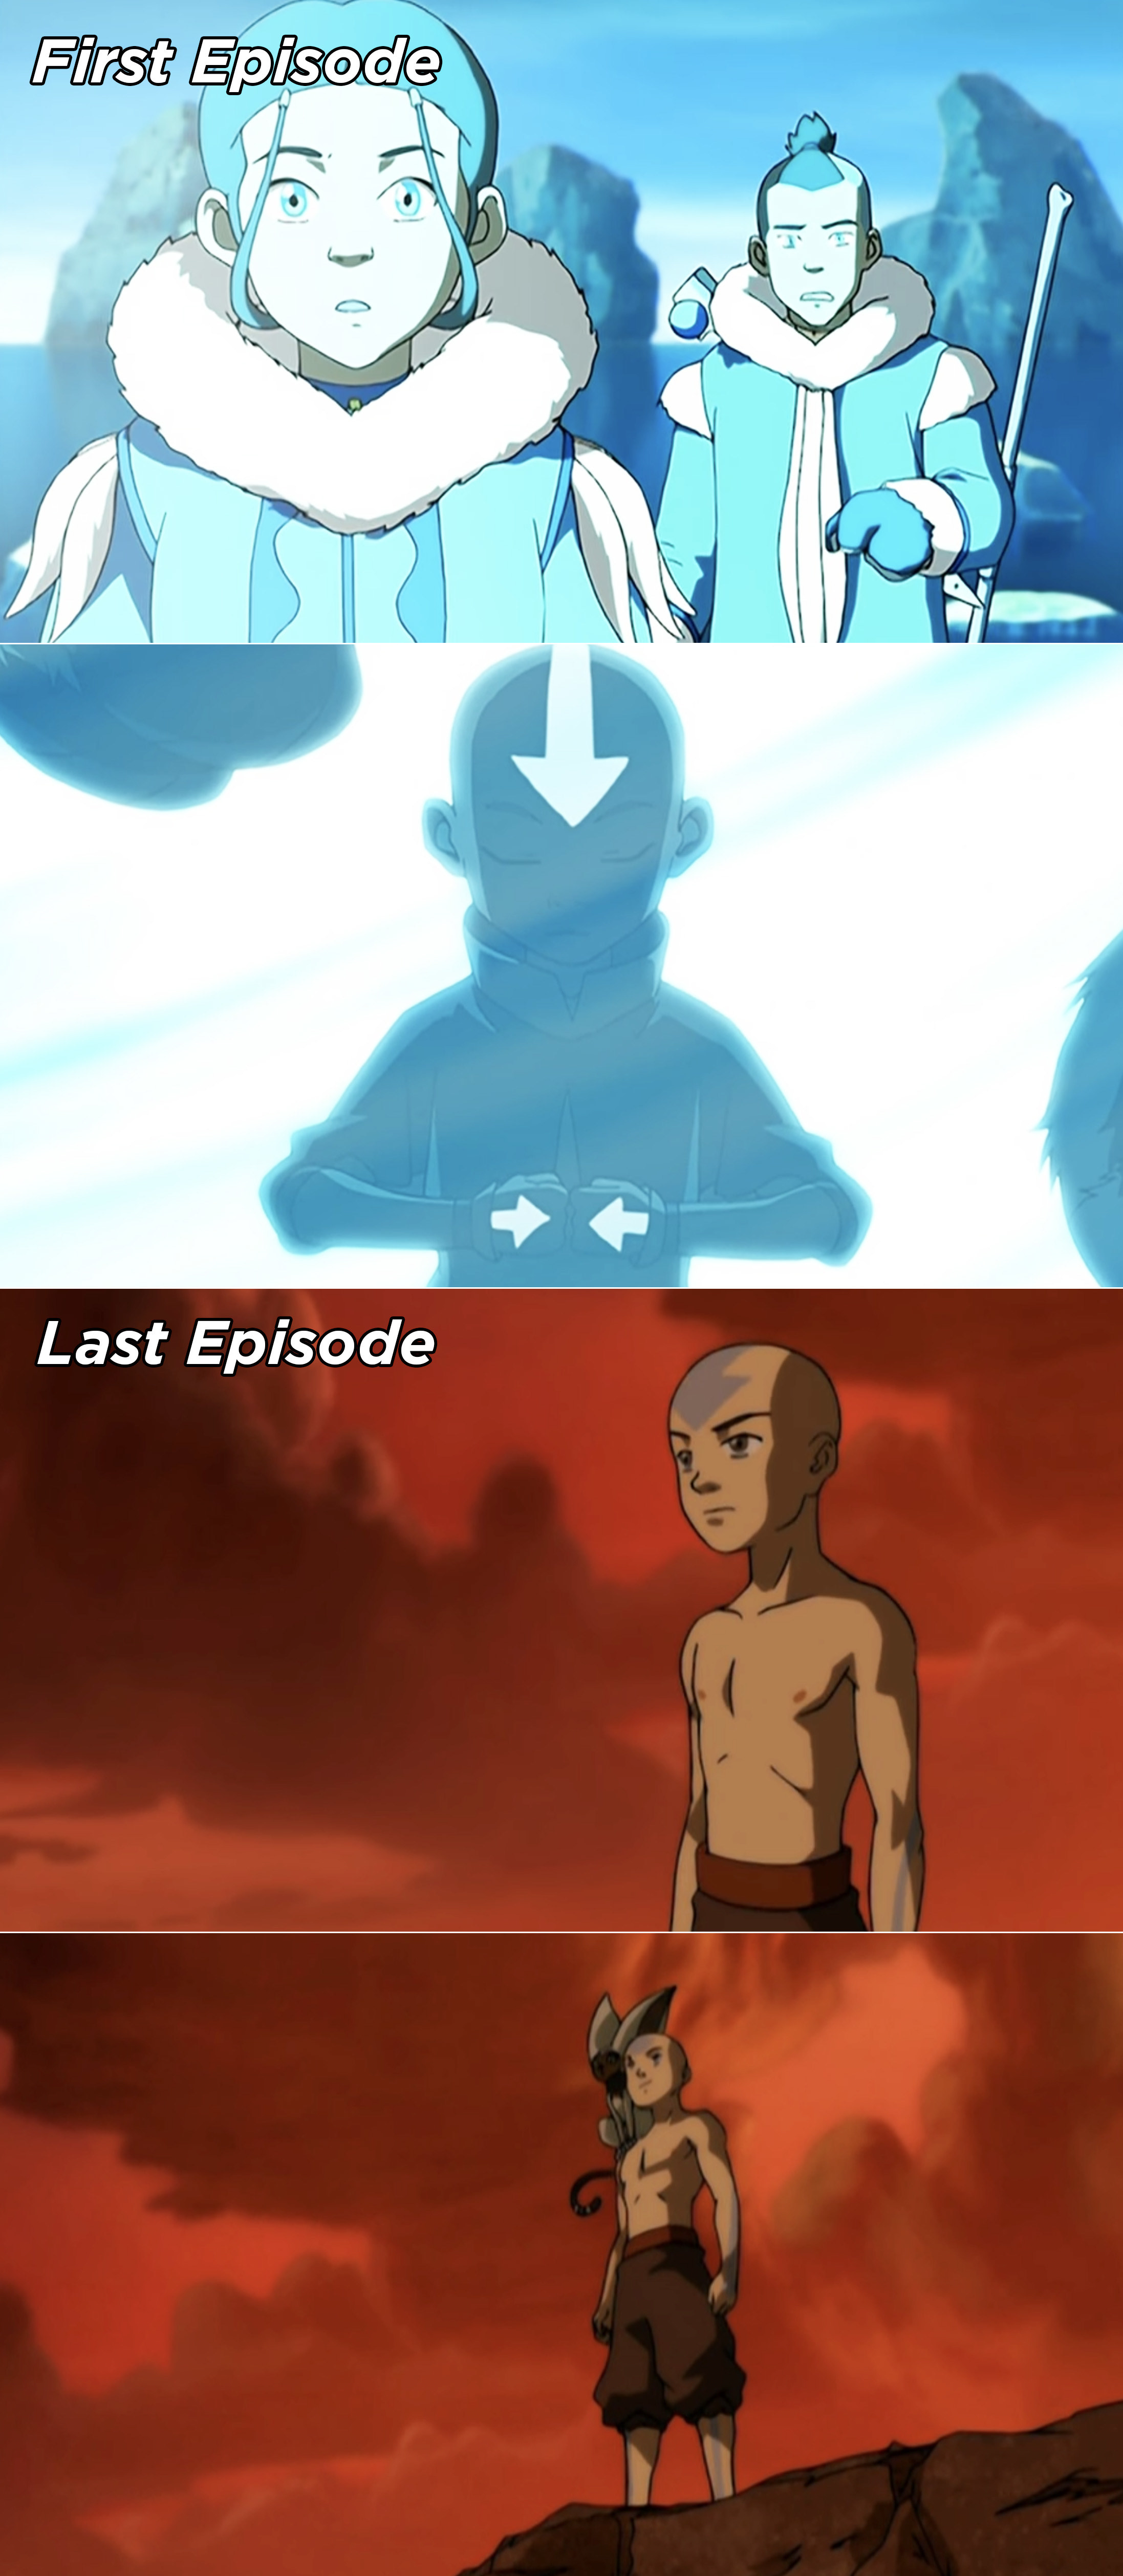 Sokka and Katara finding Aang and then Aang standing during the series finale